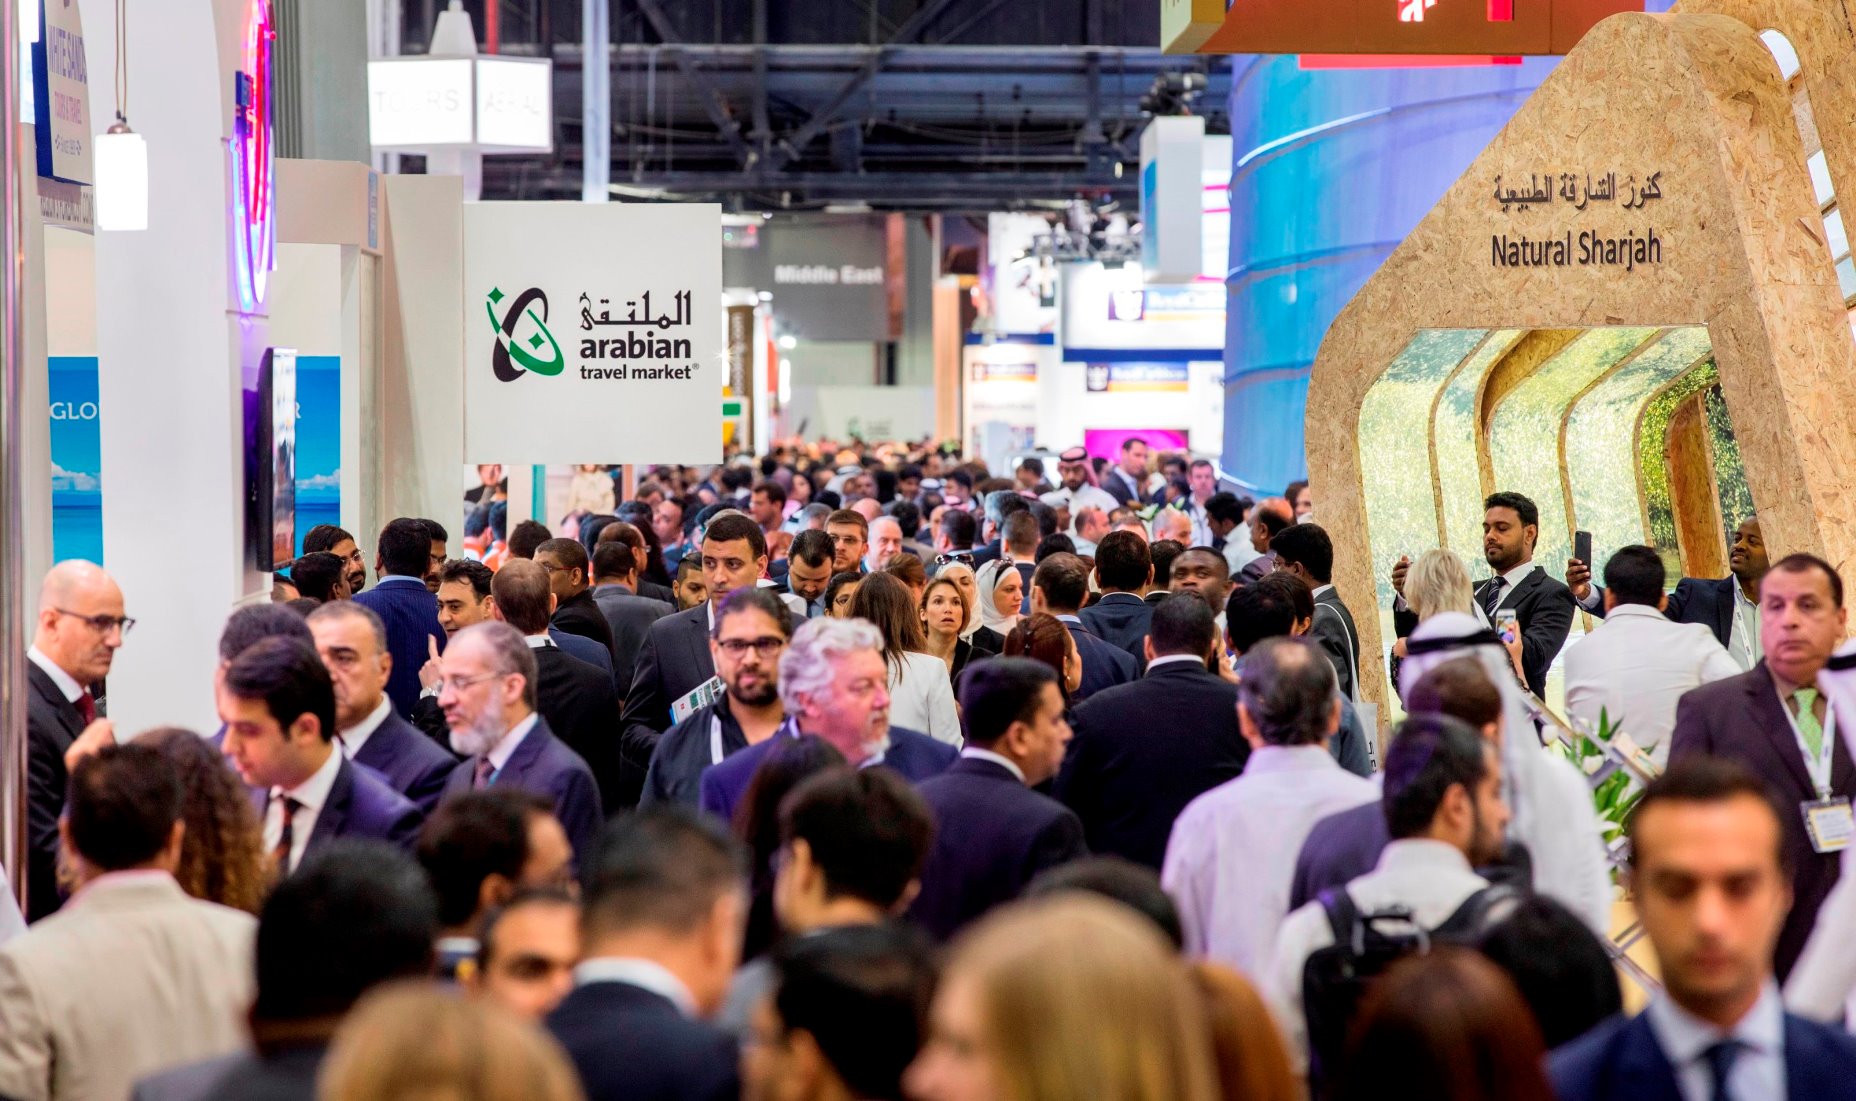 Arabian Travel Market is taking place from 22-25 April in DWTC